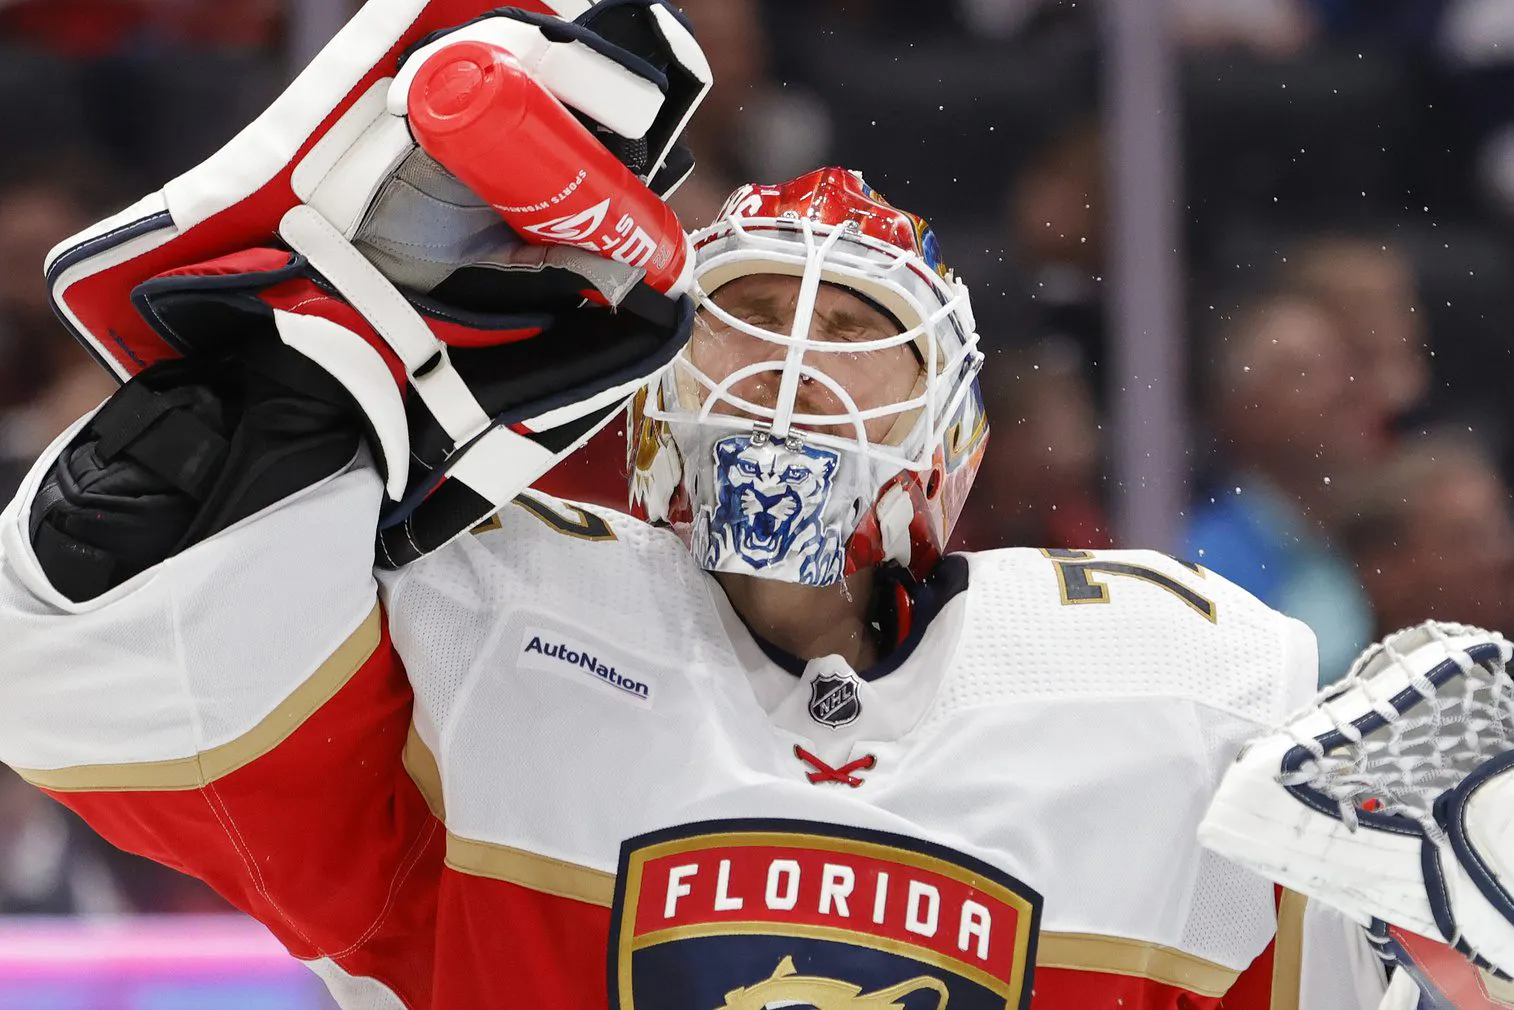 Sergei Bobrovsky is back in form for the Florida Panthers after the All-Star break